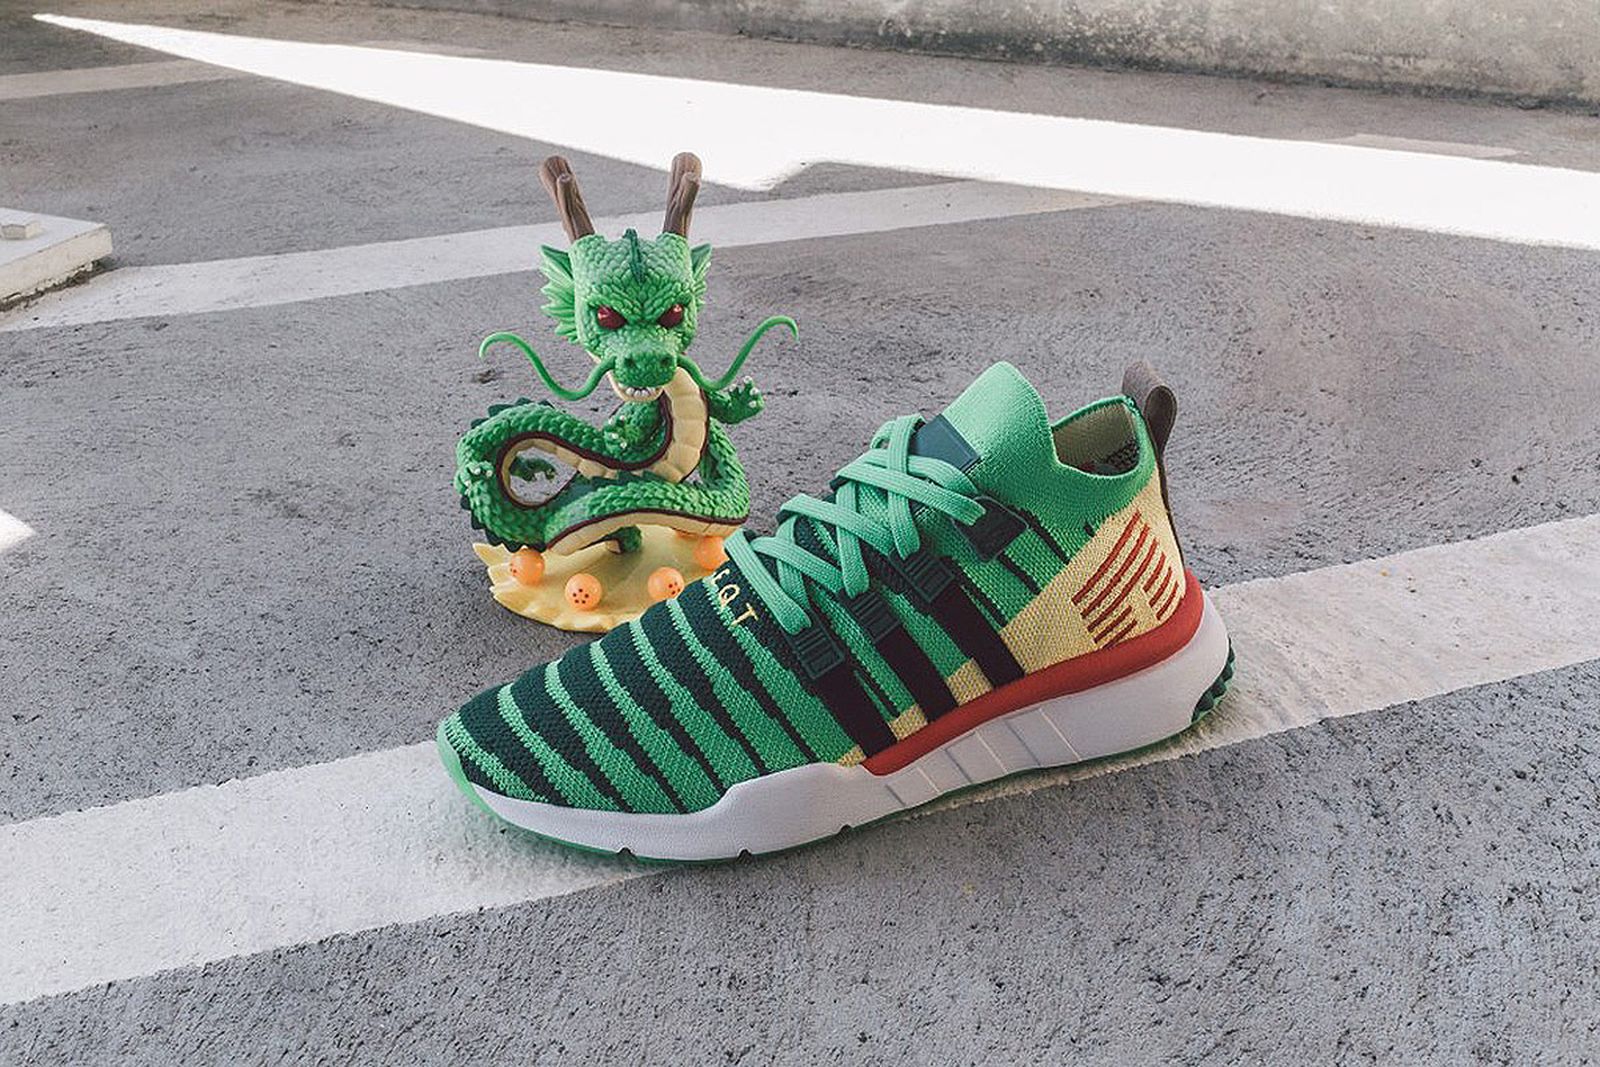 Grootste Bewolkt Neuken Dragon Ball Z' x adidas: A Complete Look at the Collection